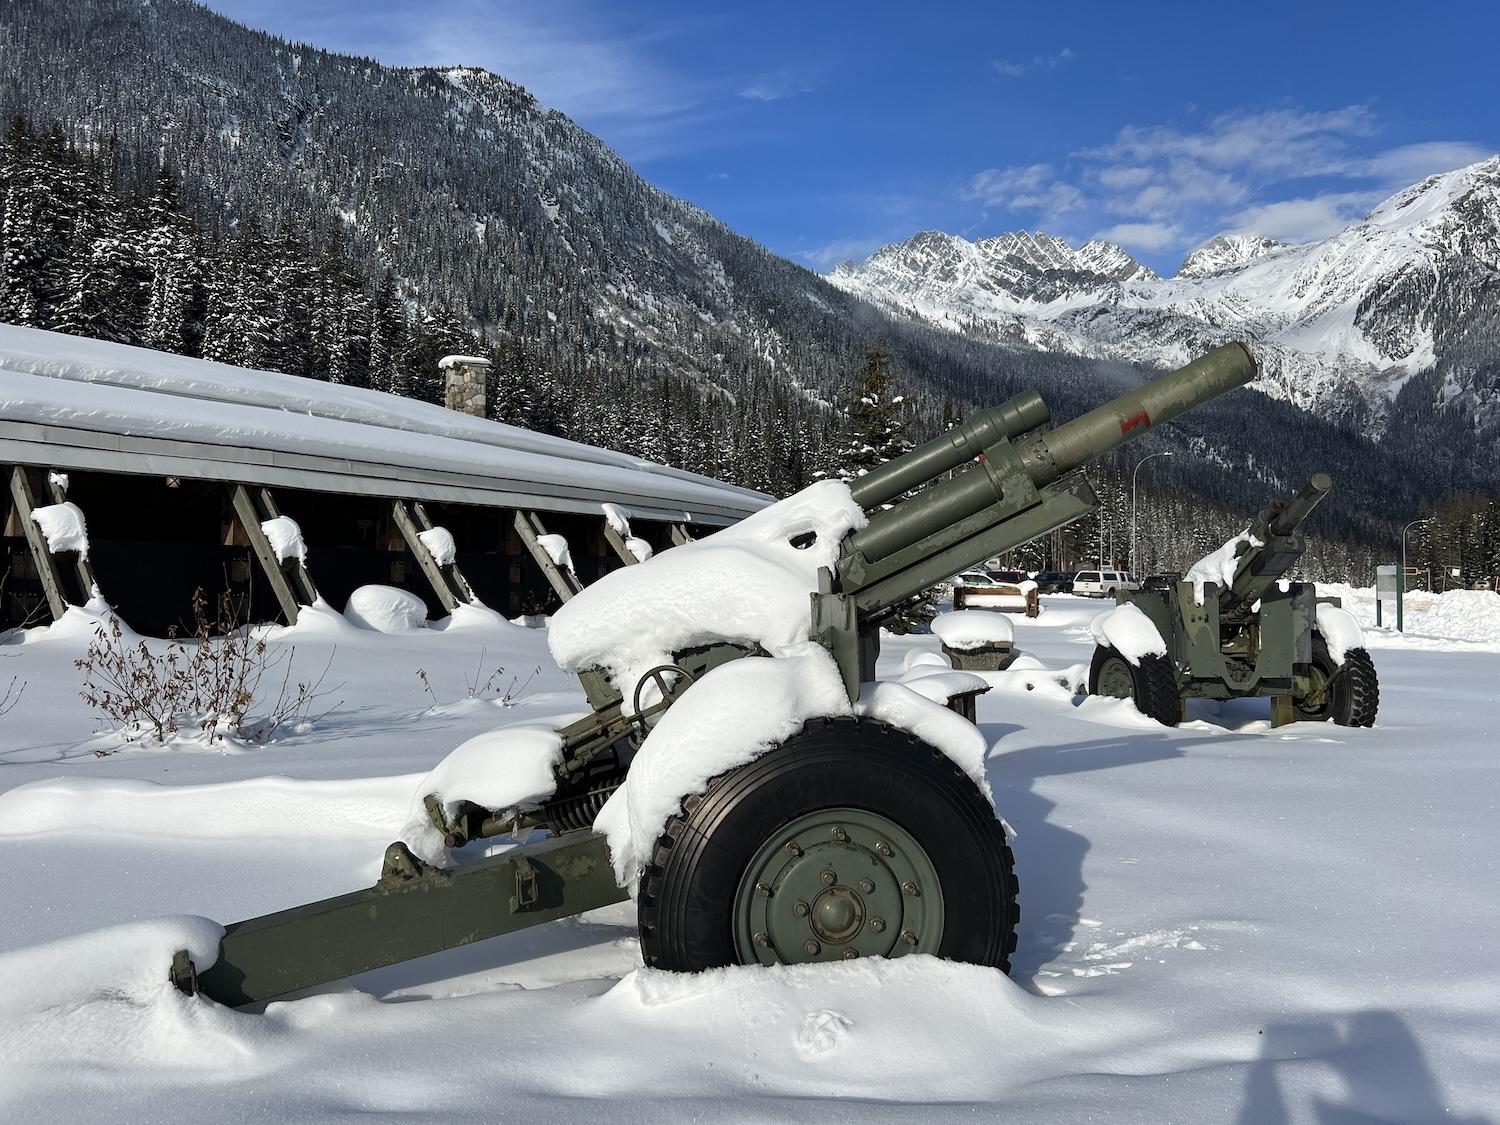 You can see these howitzers outside the Rogers Pass Discovery Centre in Glacier National Park.